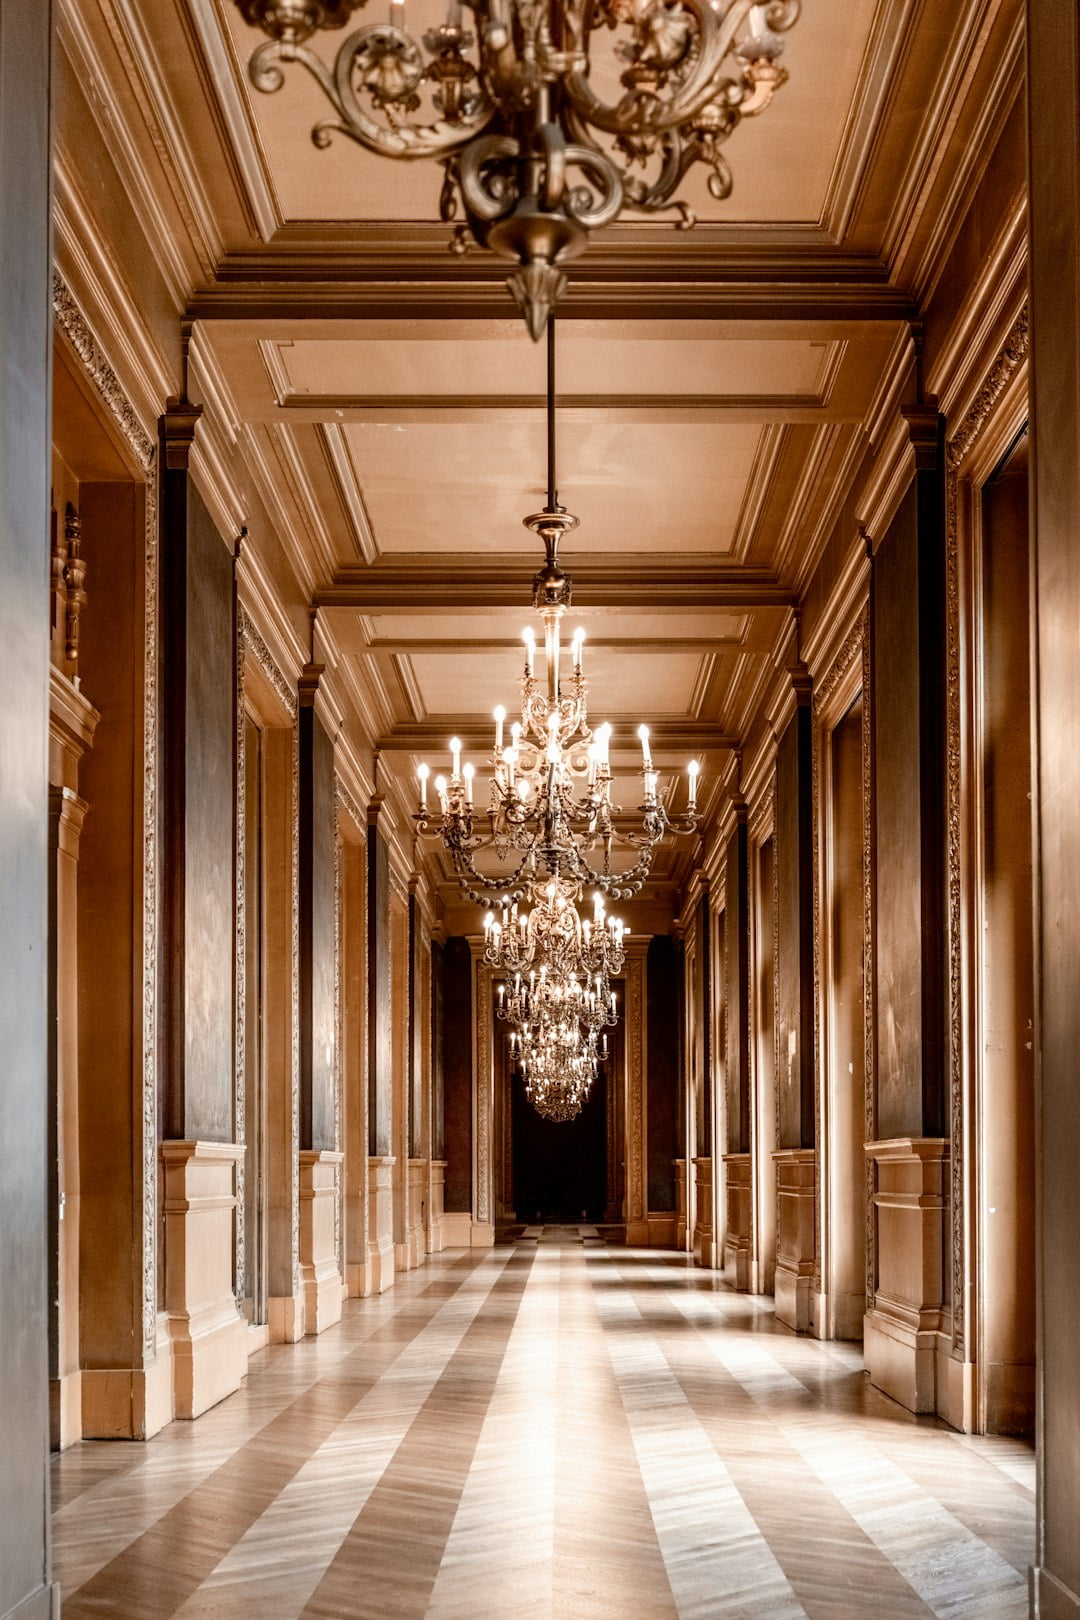 A grand hallway in a castle adorned with impressive chandeliers hanging from the ceiling